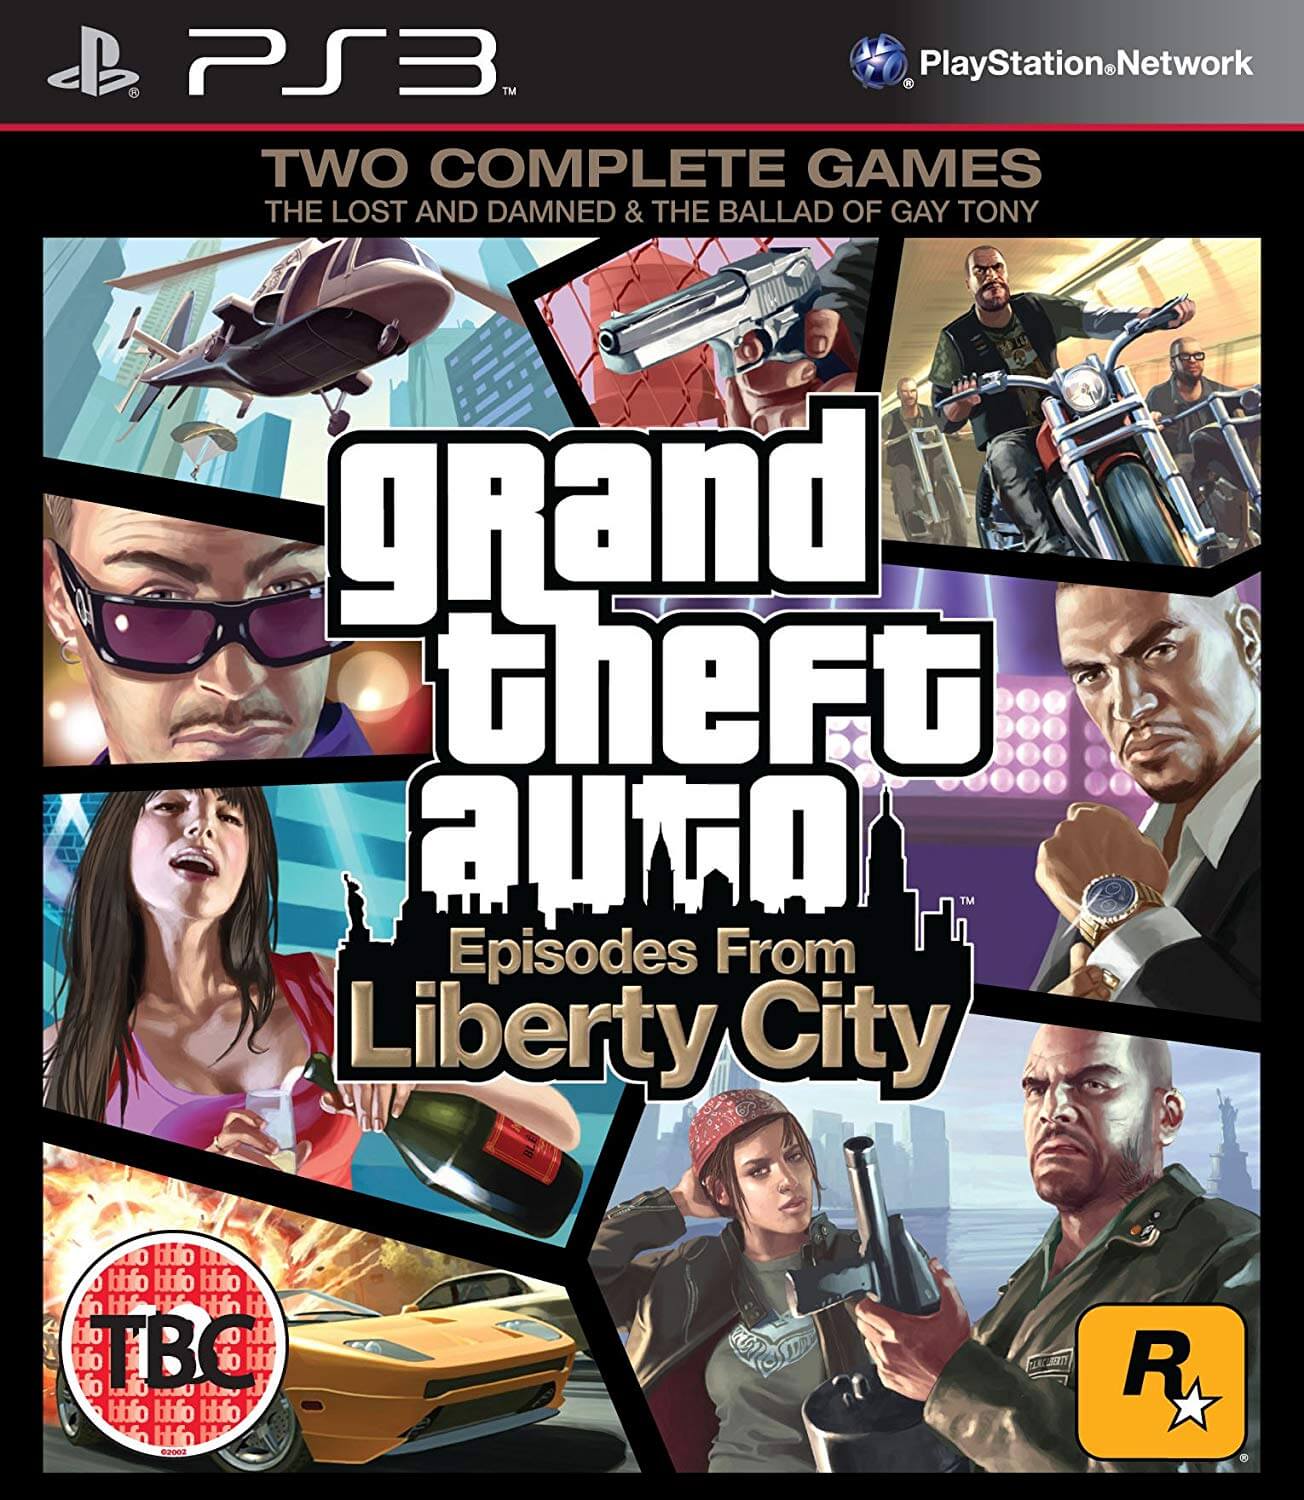 gta episodes from liberty city iso